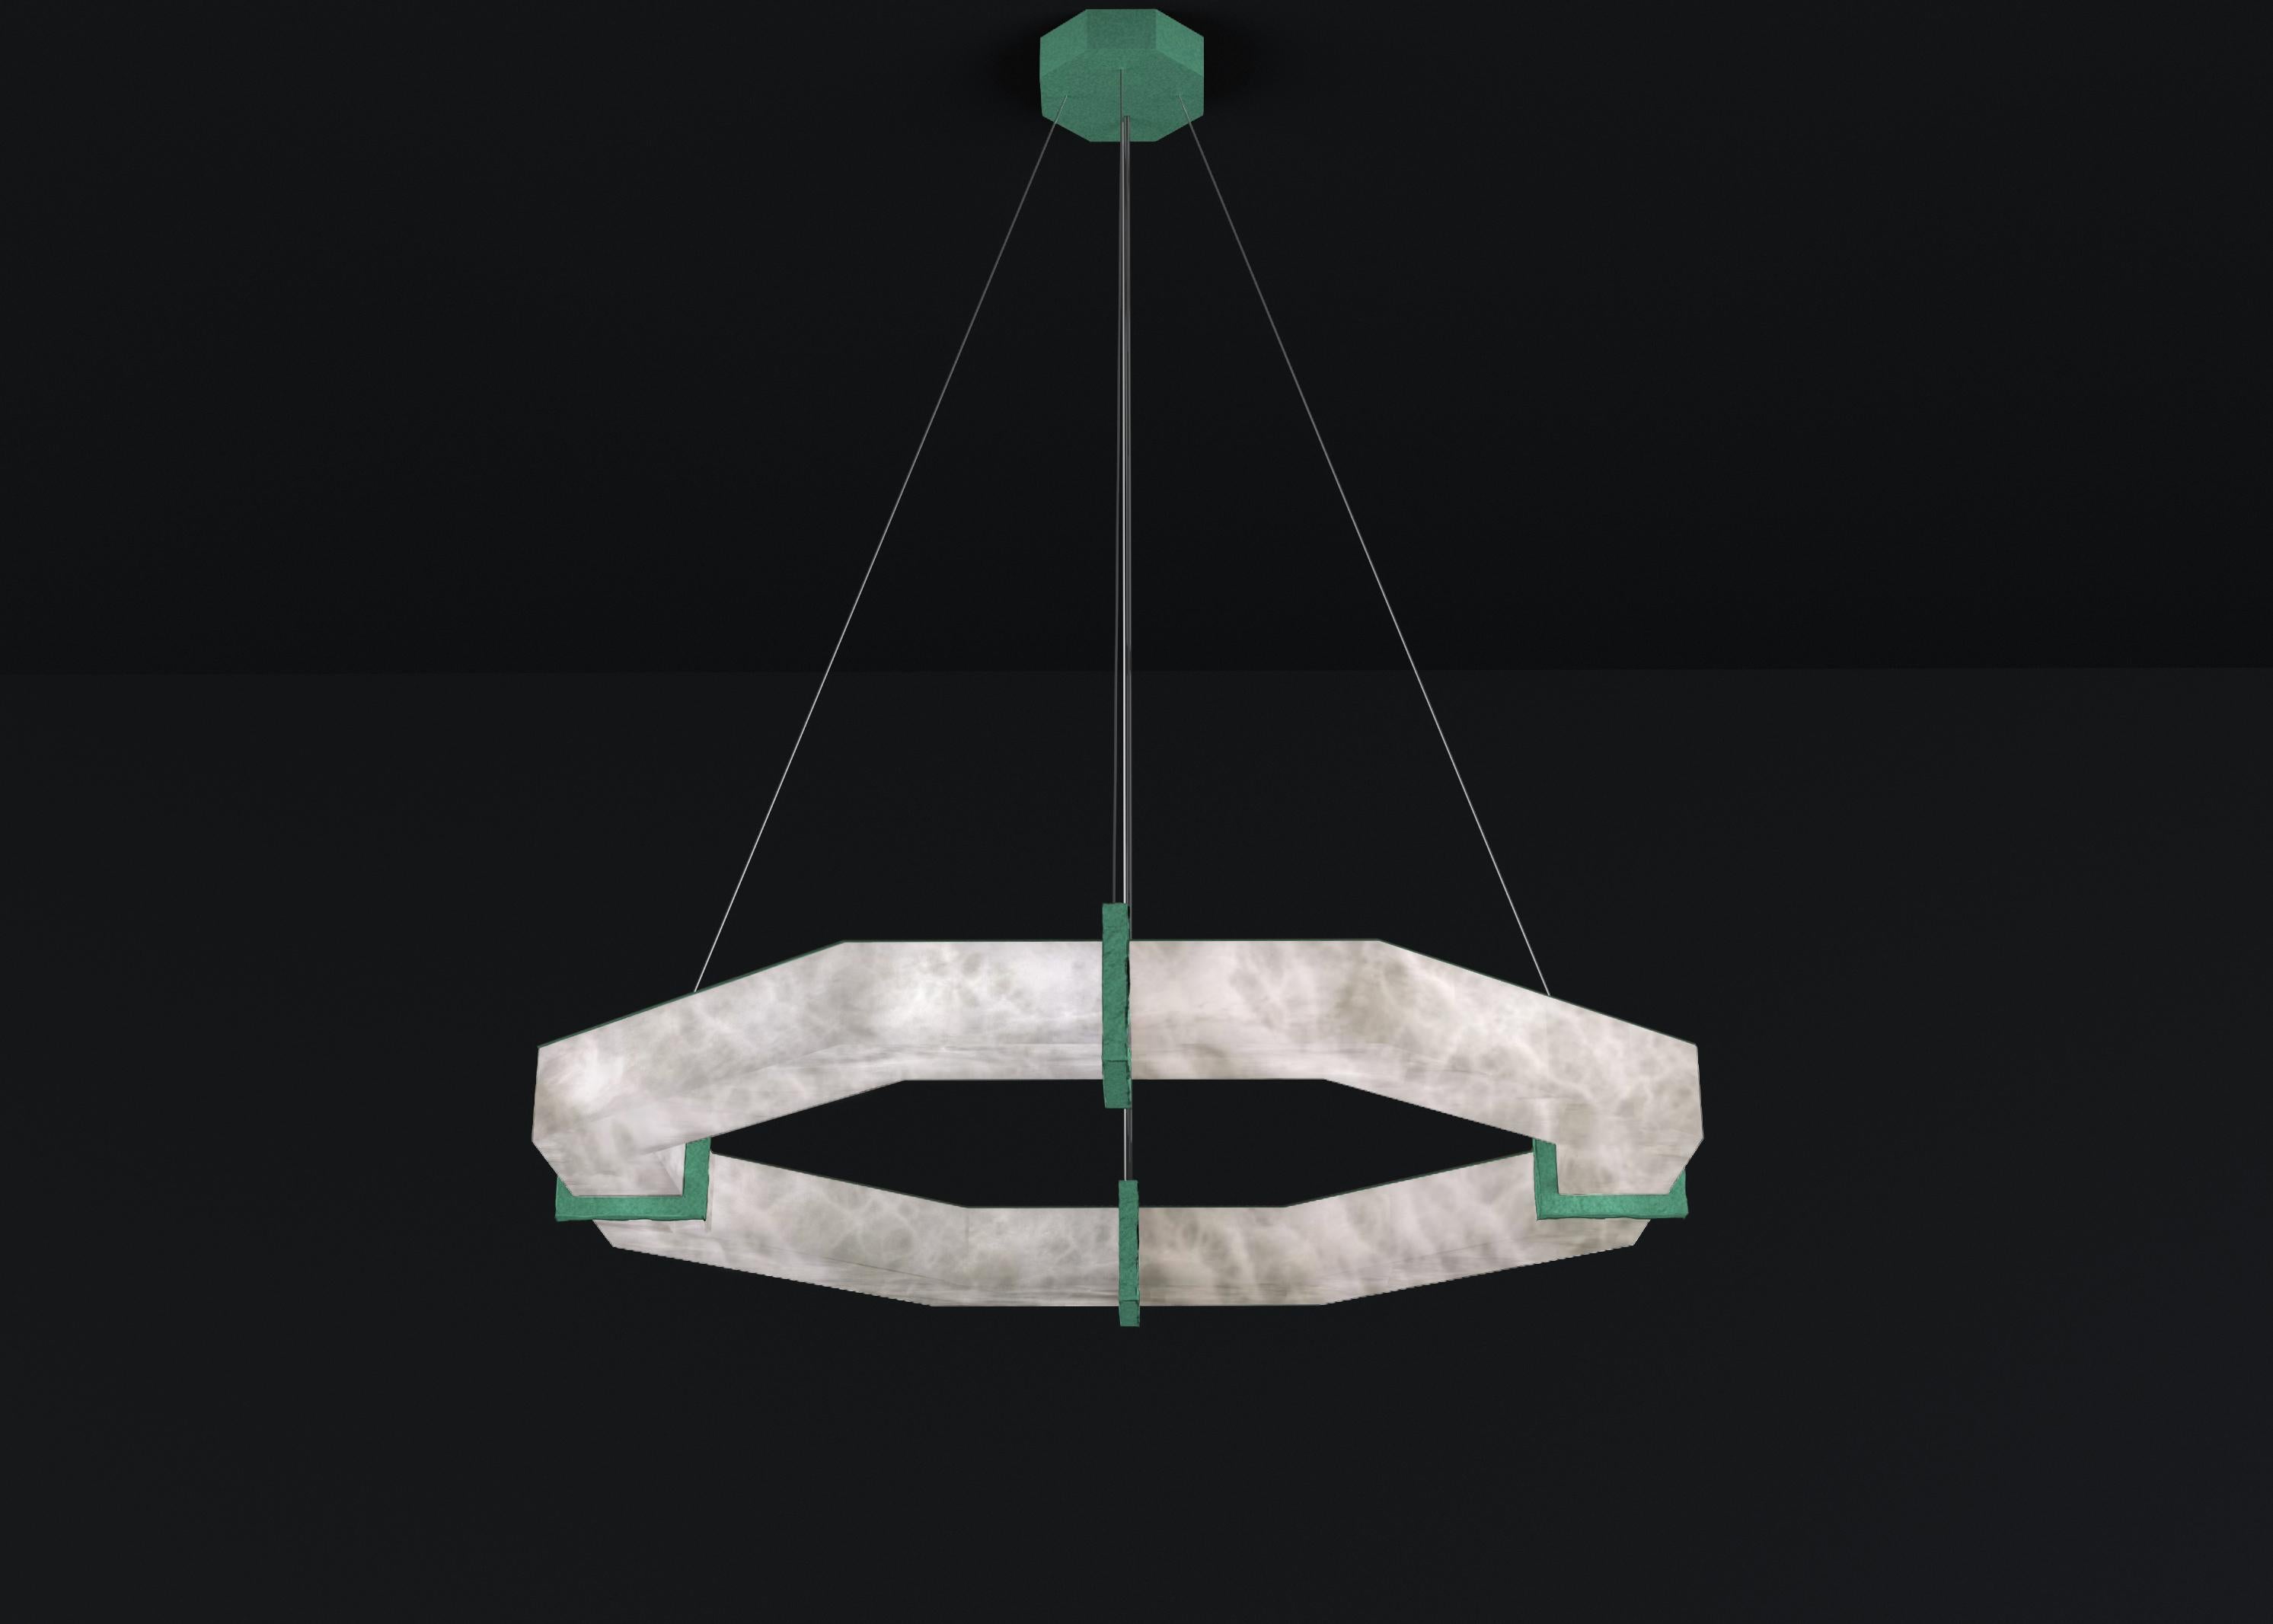 Efesto Freedom Green Metal Pendant Lamp by Alabastro Italiano
Dimensions: D 83 x W 80 x H 11 cm.
Materials: White alabaster and metal.

Available in different finishes: Shiny Silver, Bronze, Brushed Brass, Ruggine of Florence, Brushed Burnished,